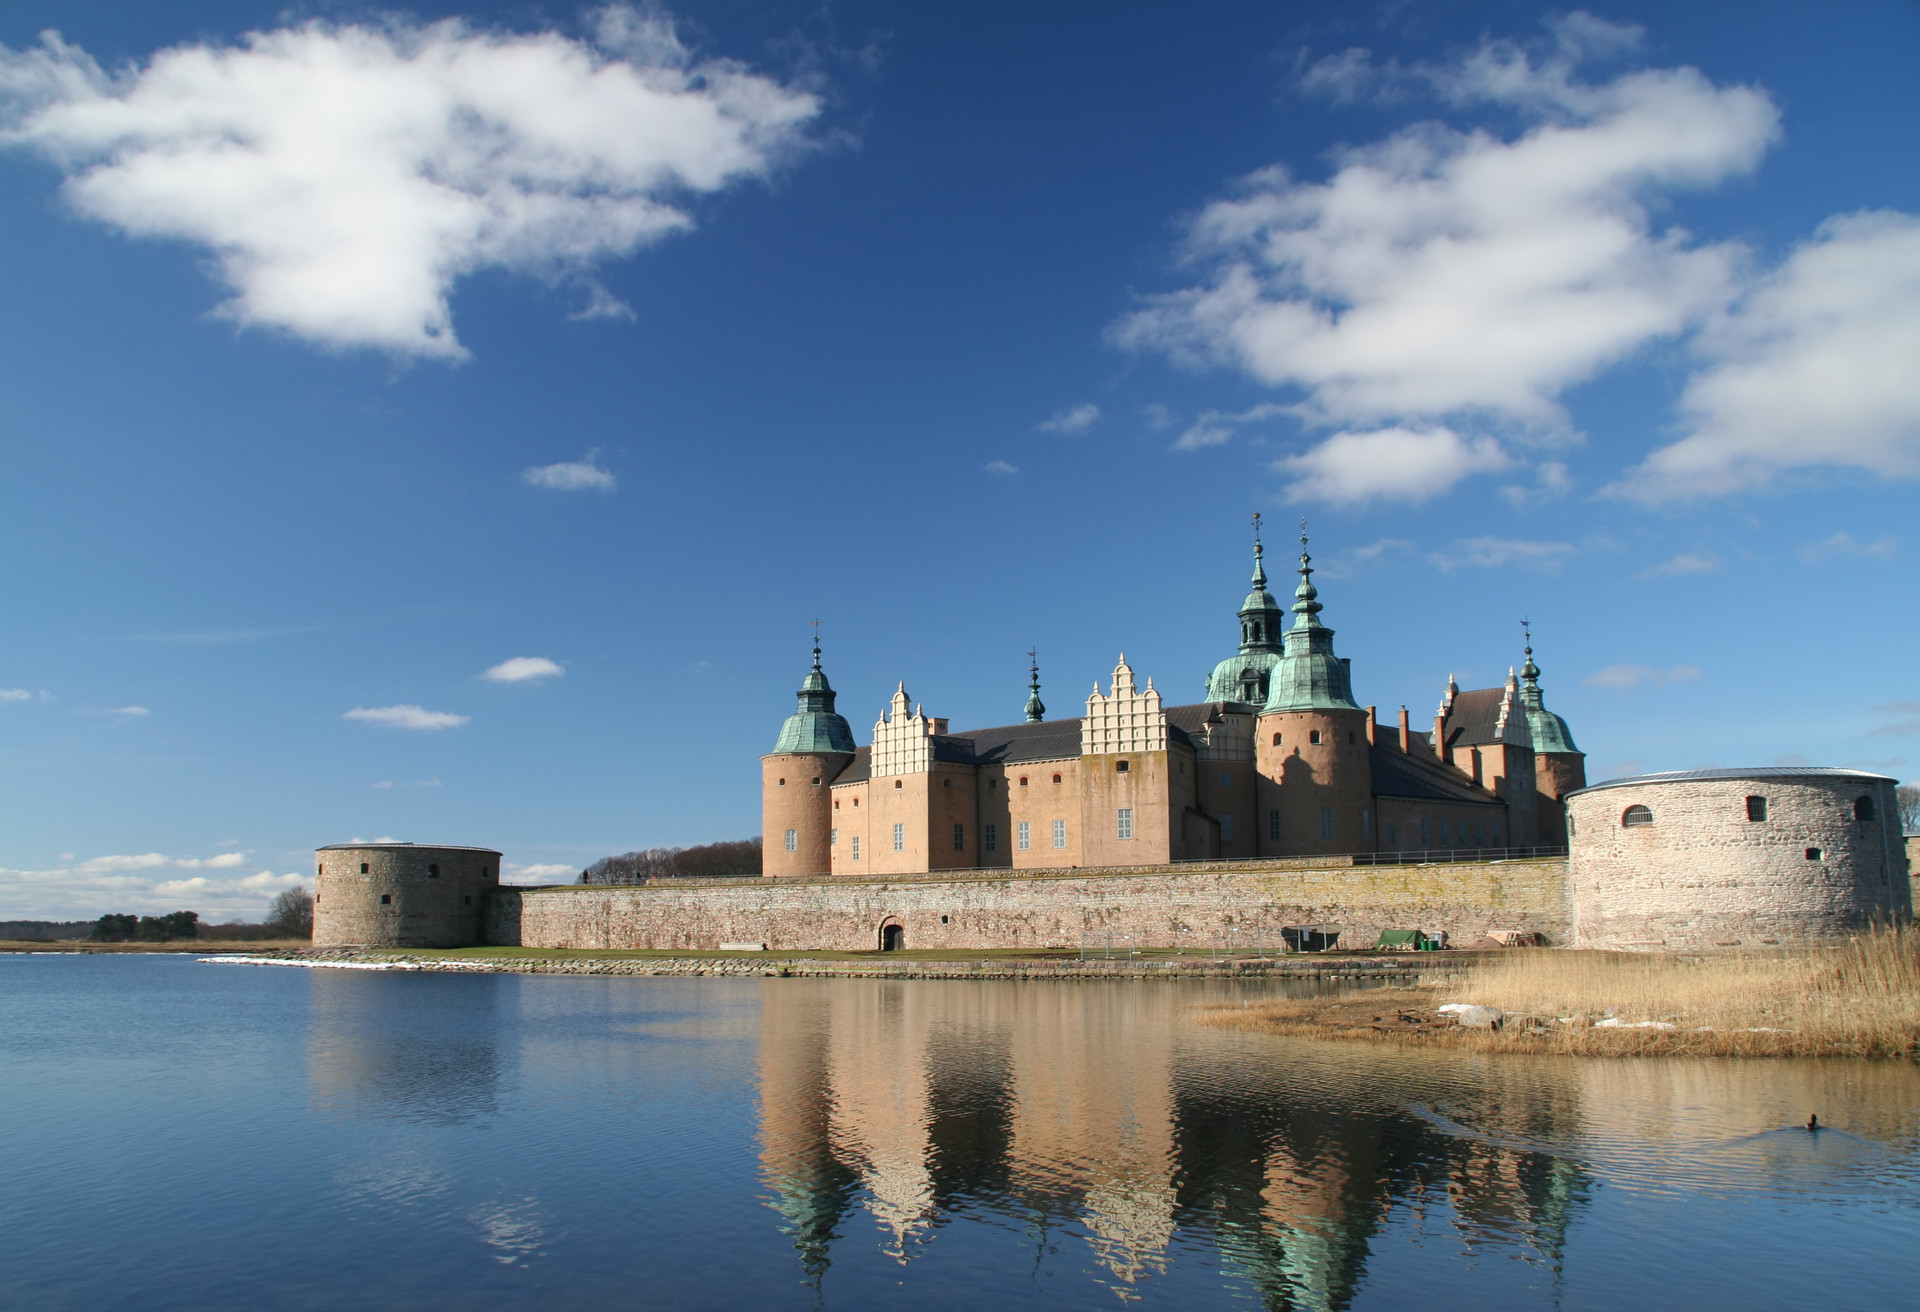 The grand Kalmar castle, founded in the 12th century and finalized during the 16th century.